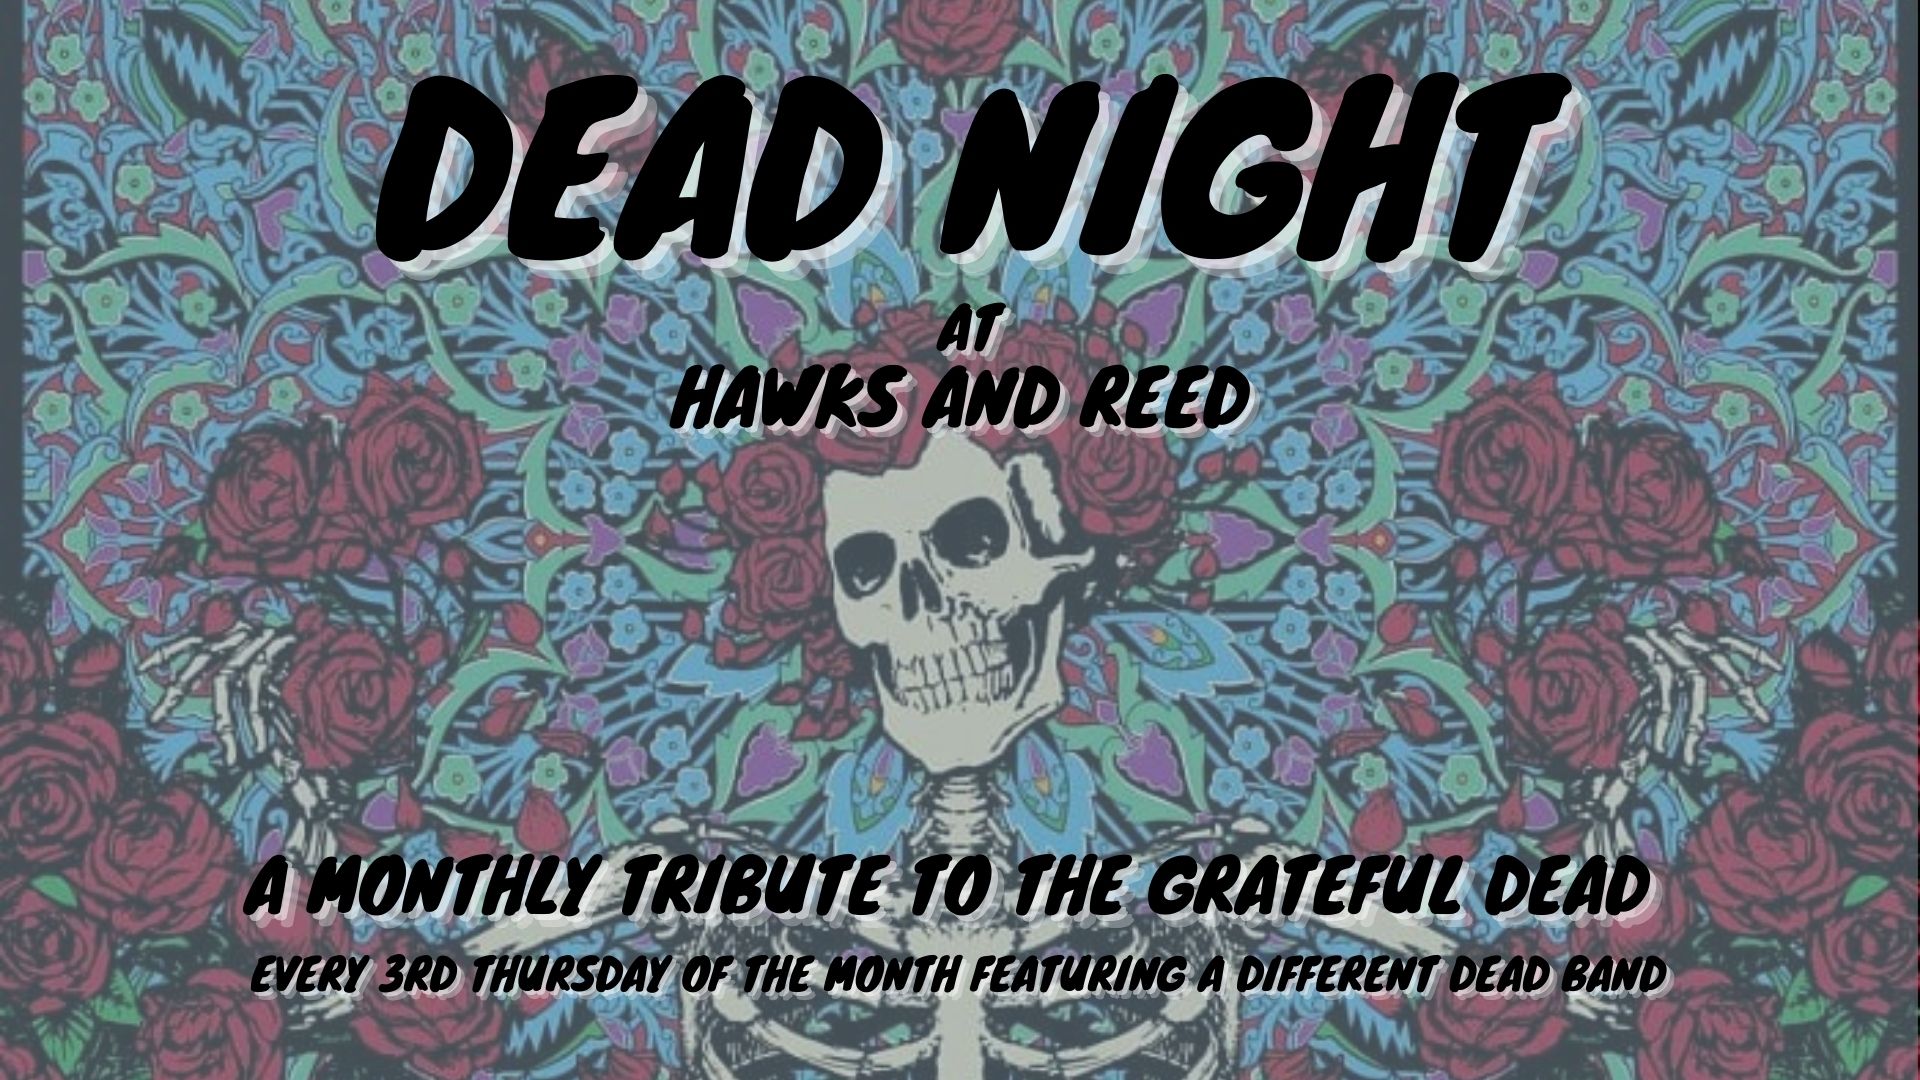 DEAD NIGHT AT HAWKS AND REED – Feat Dead Collective